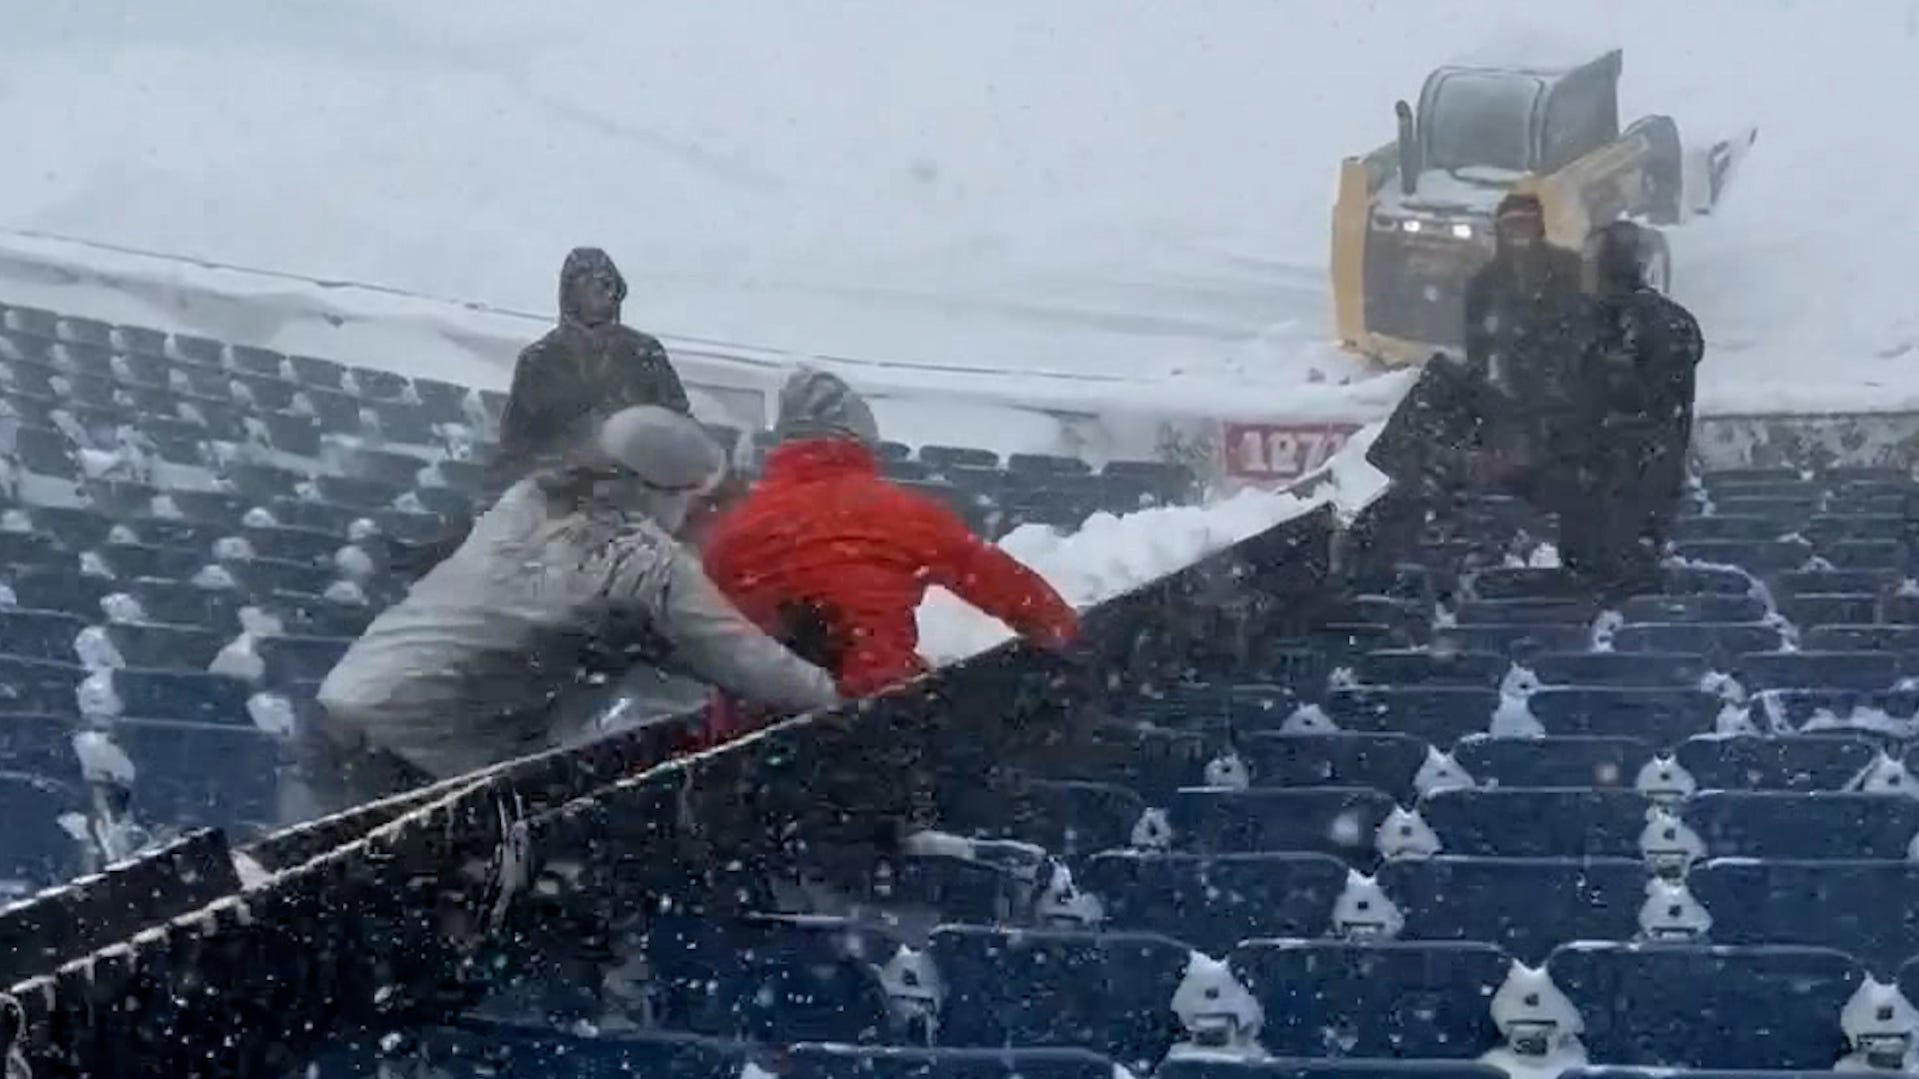 Push Him Onto The Field Fans Have Fun While Shoveling Snow At Bills Stadium 1289